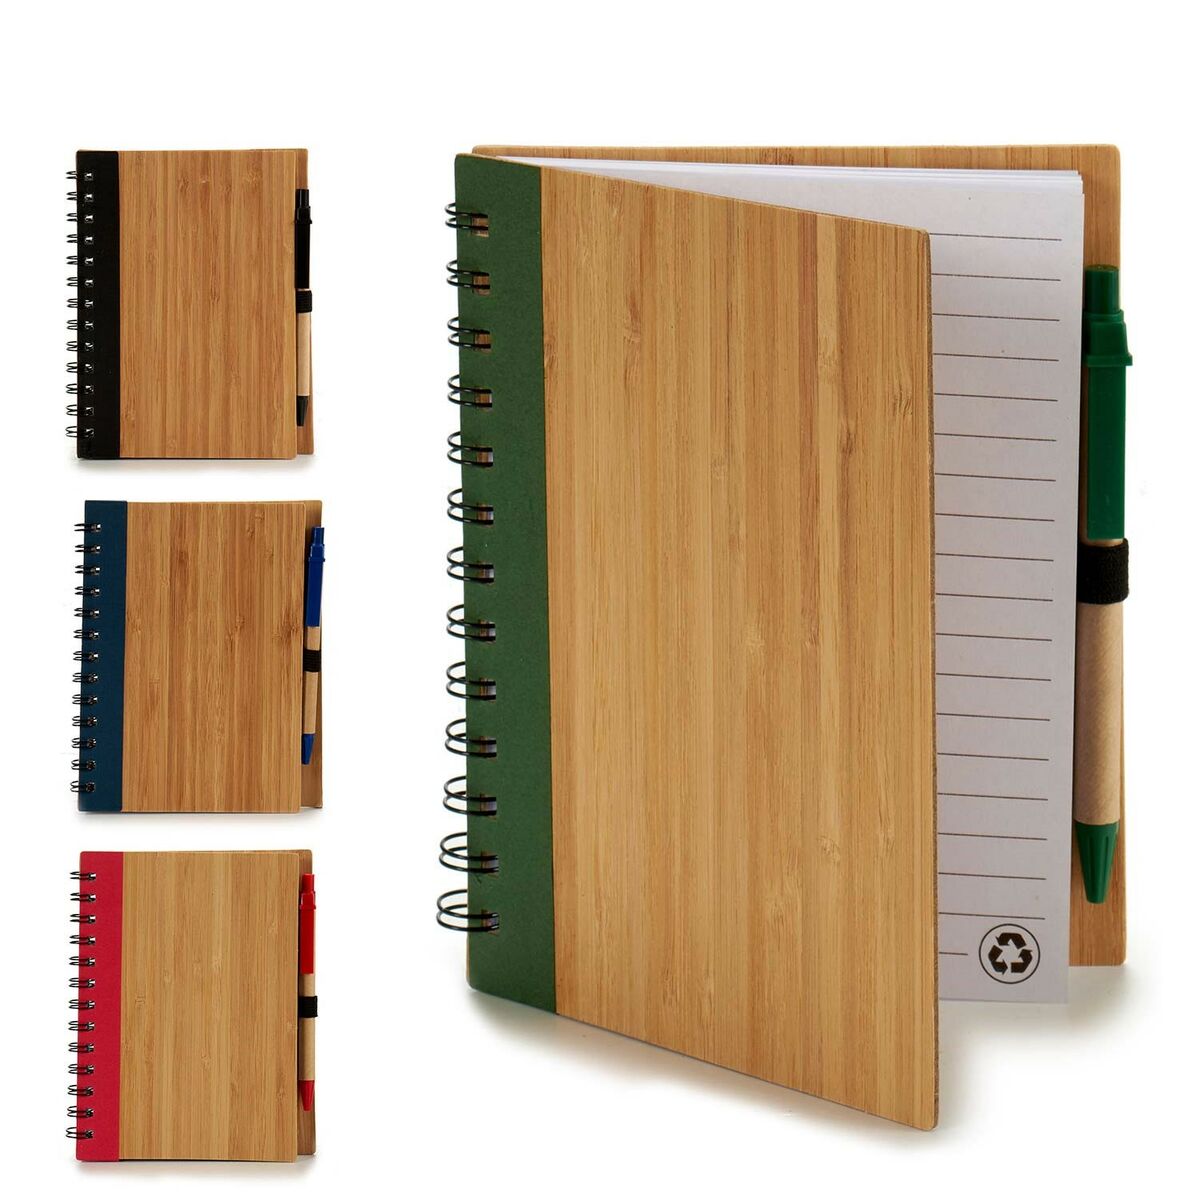 Spiral Notebook with Pen Bamboo 14 x 18 cm (12 Units)